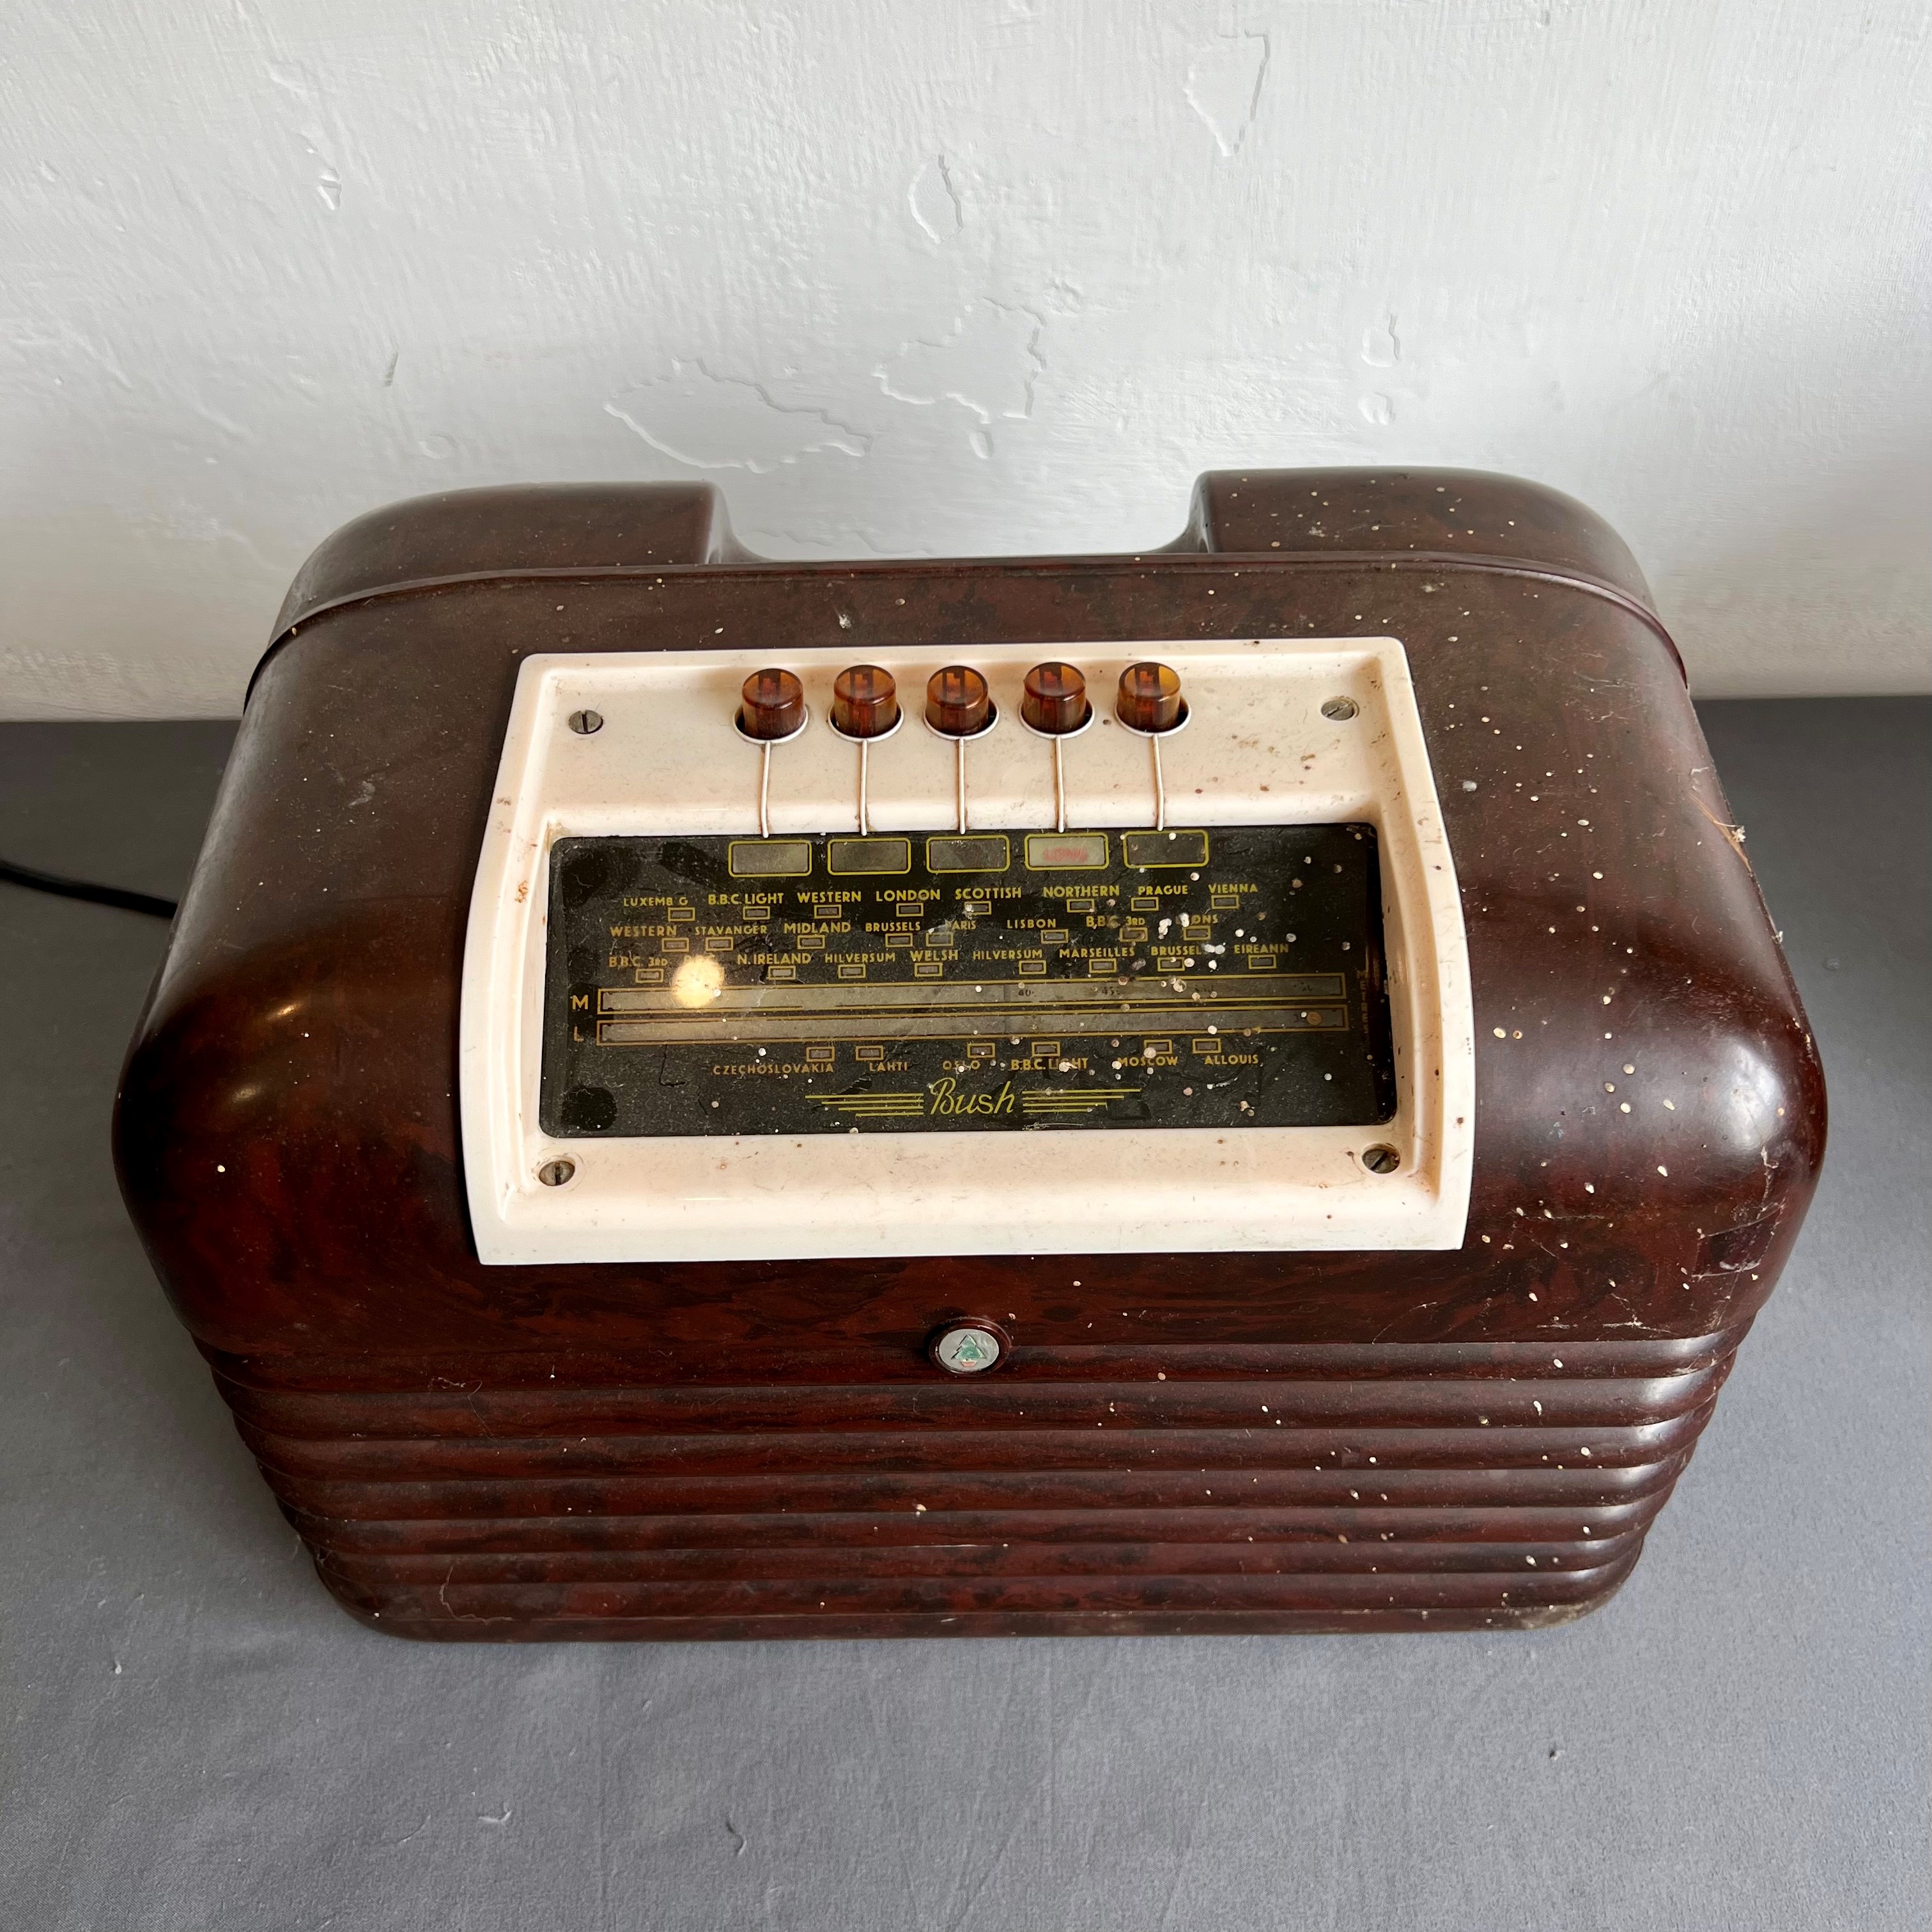 Two Bush bakelite radios - 1950s, comprising a DAC 90A and a DAC 10, both with brown bakelite cases, - Image 4 of 8